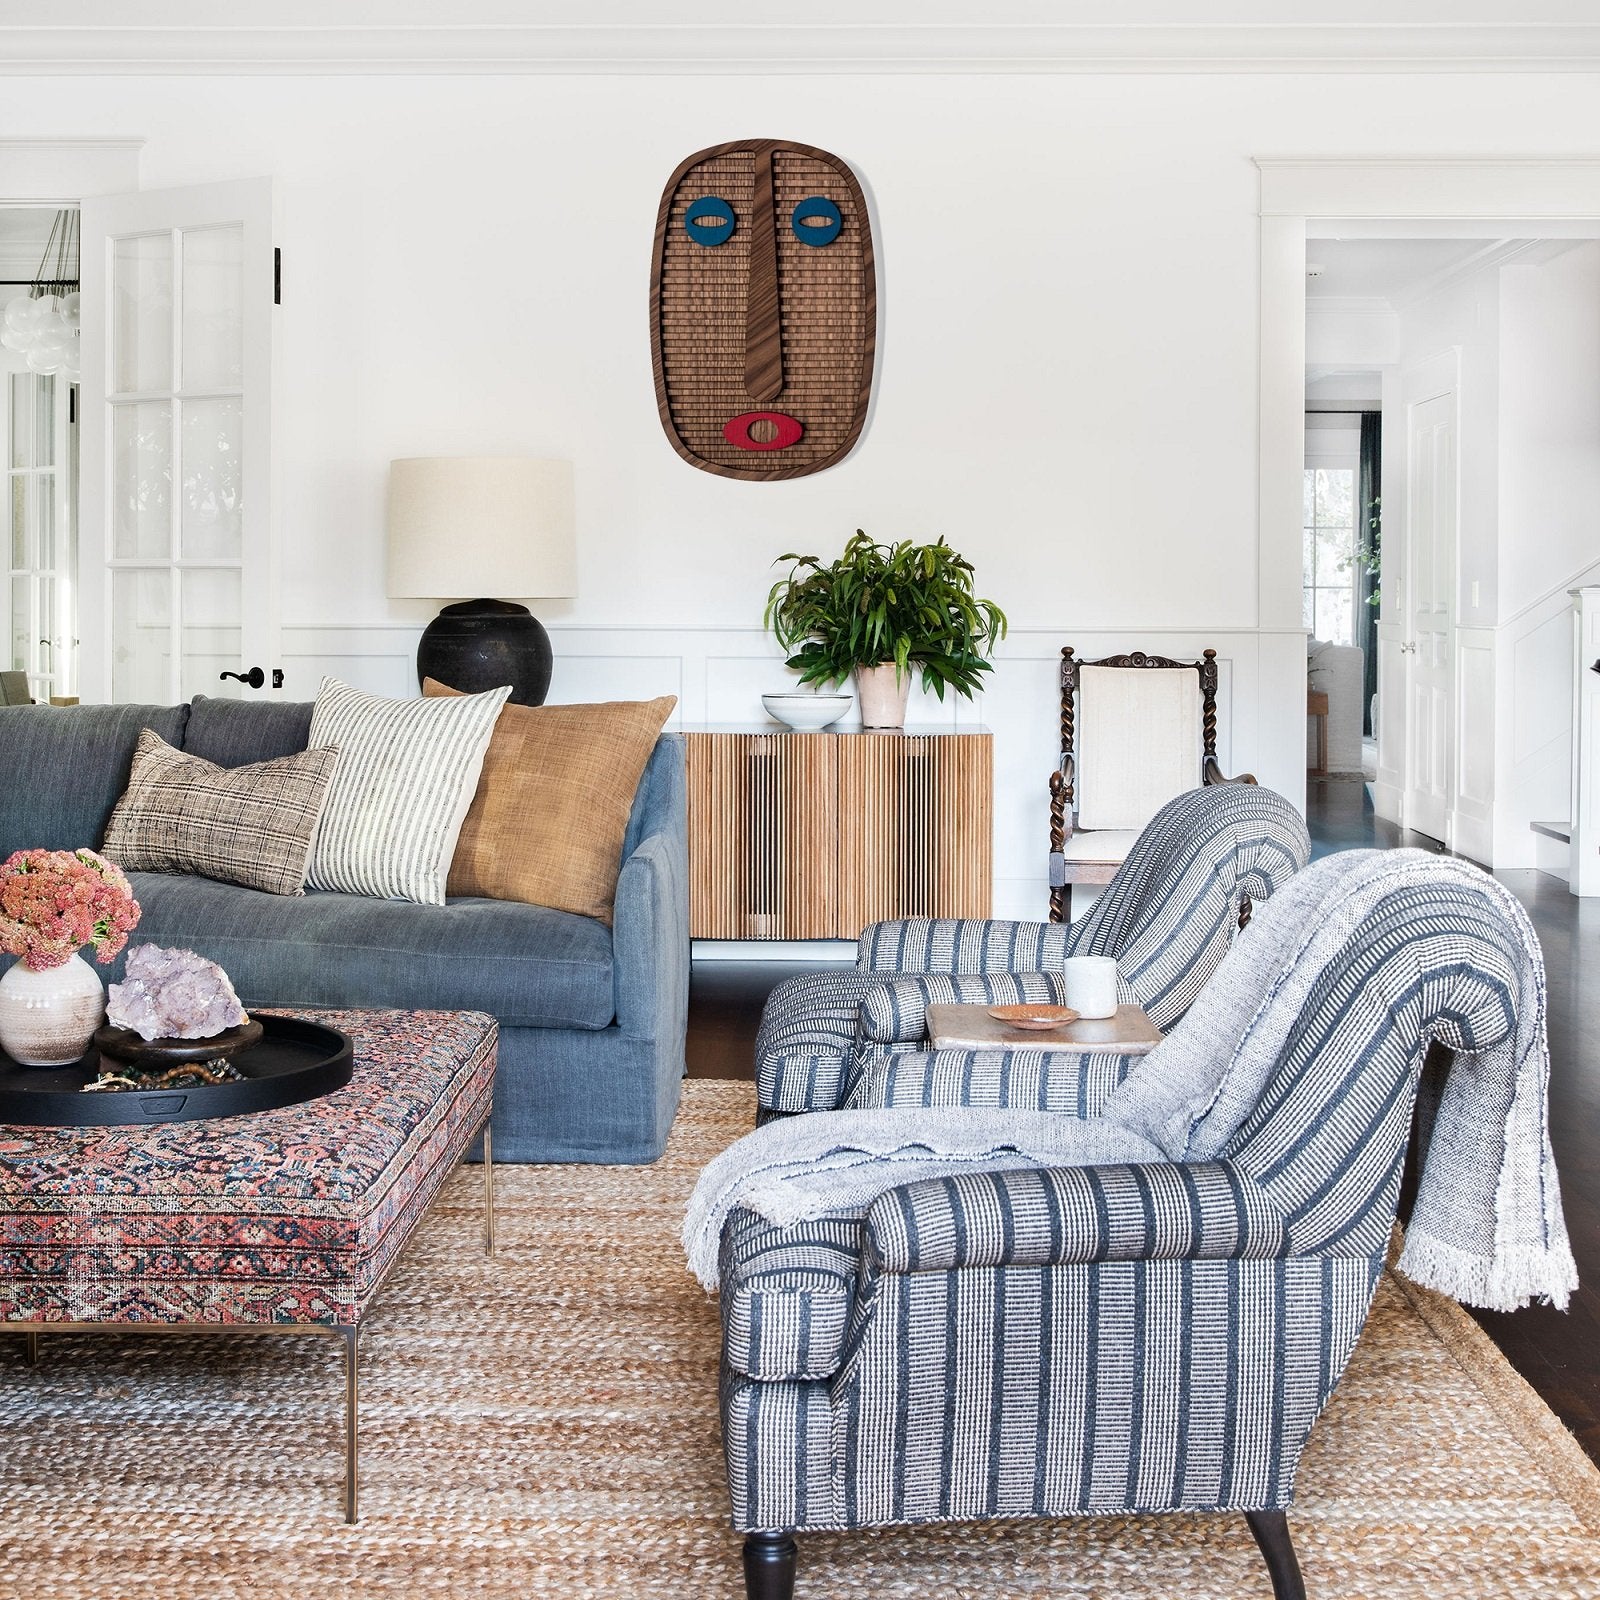 Picasso African Masks for Wall Decor by Umasqu